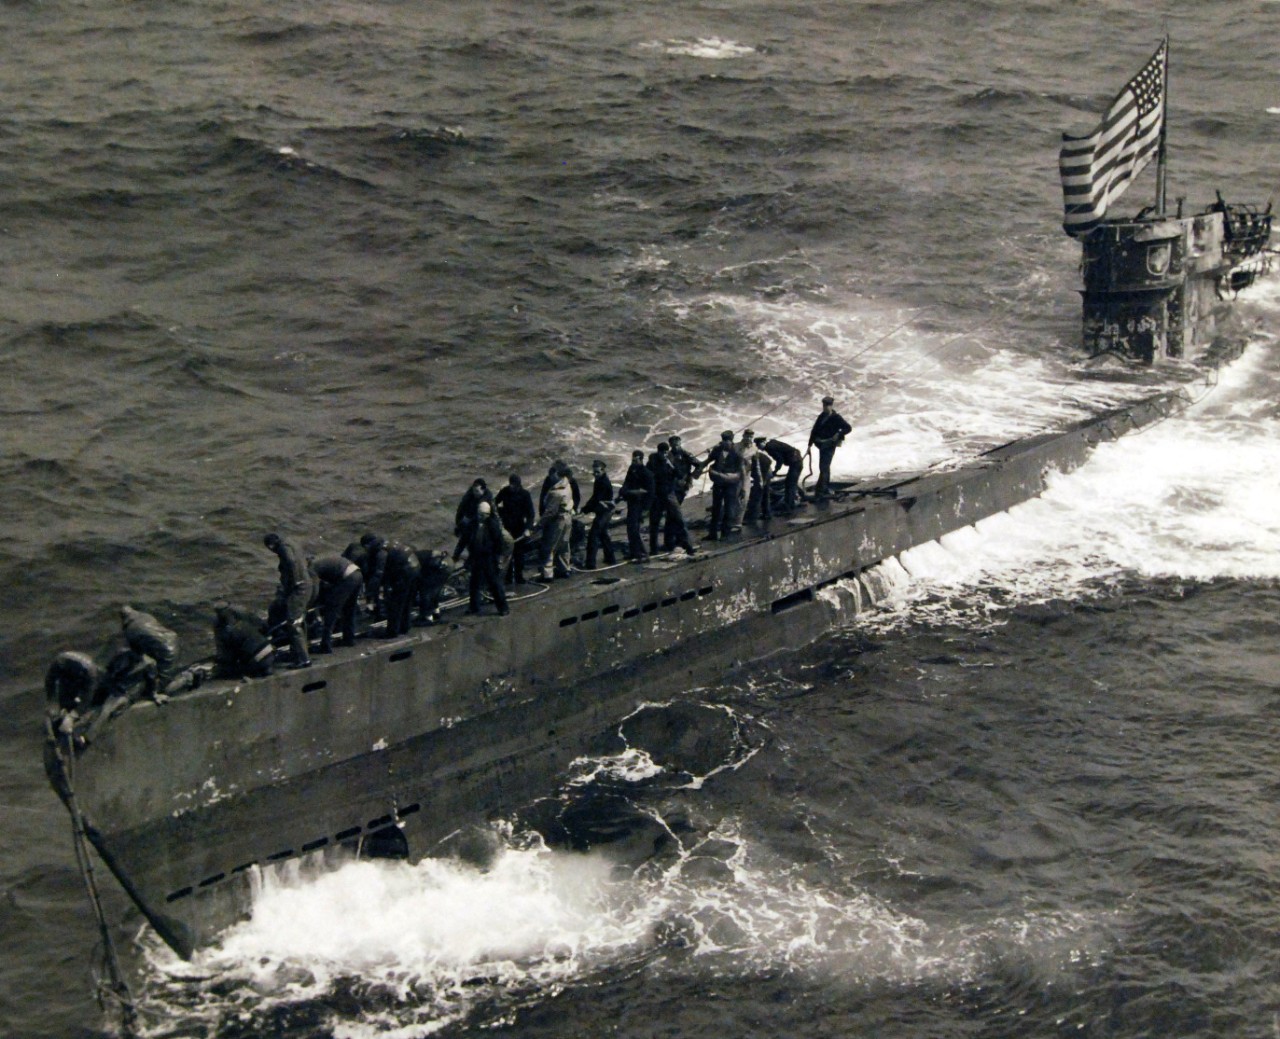 <p>80-G-49172: Capture of German Submarine U-505, June 4, 1944. Members of the boarding party from USS Pillsbury (DE 133) secure the tow-line to the bow of the captured German submarine, U-505. Because the sea was sweeping across the deck amidships, the men of the boarding party were forced to hang tightly to a guide wire running from the conning tower to the bow in moving forward or aft.&nbsp;</p>
